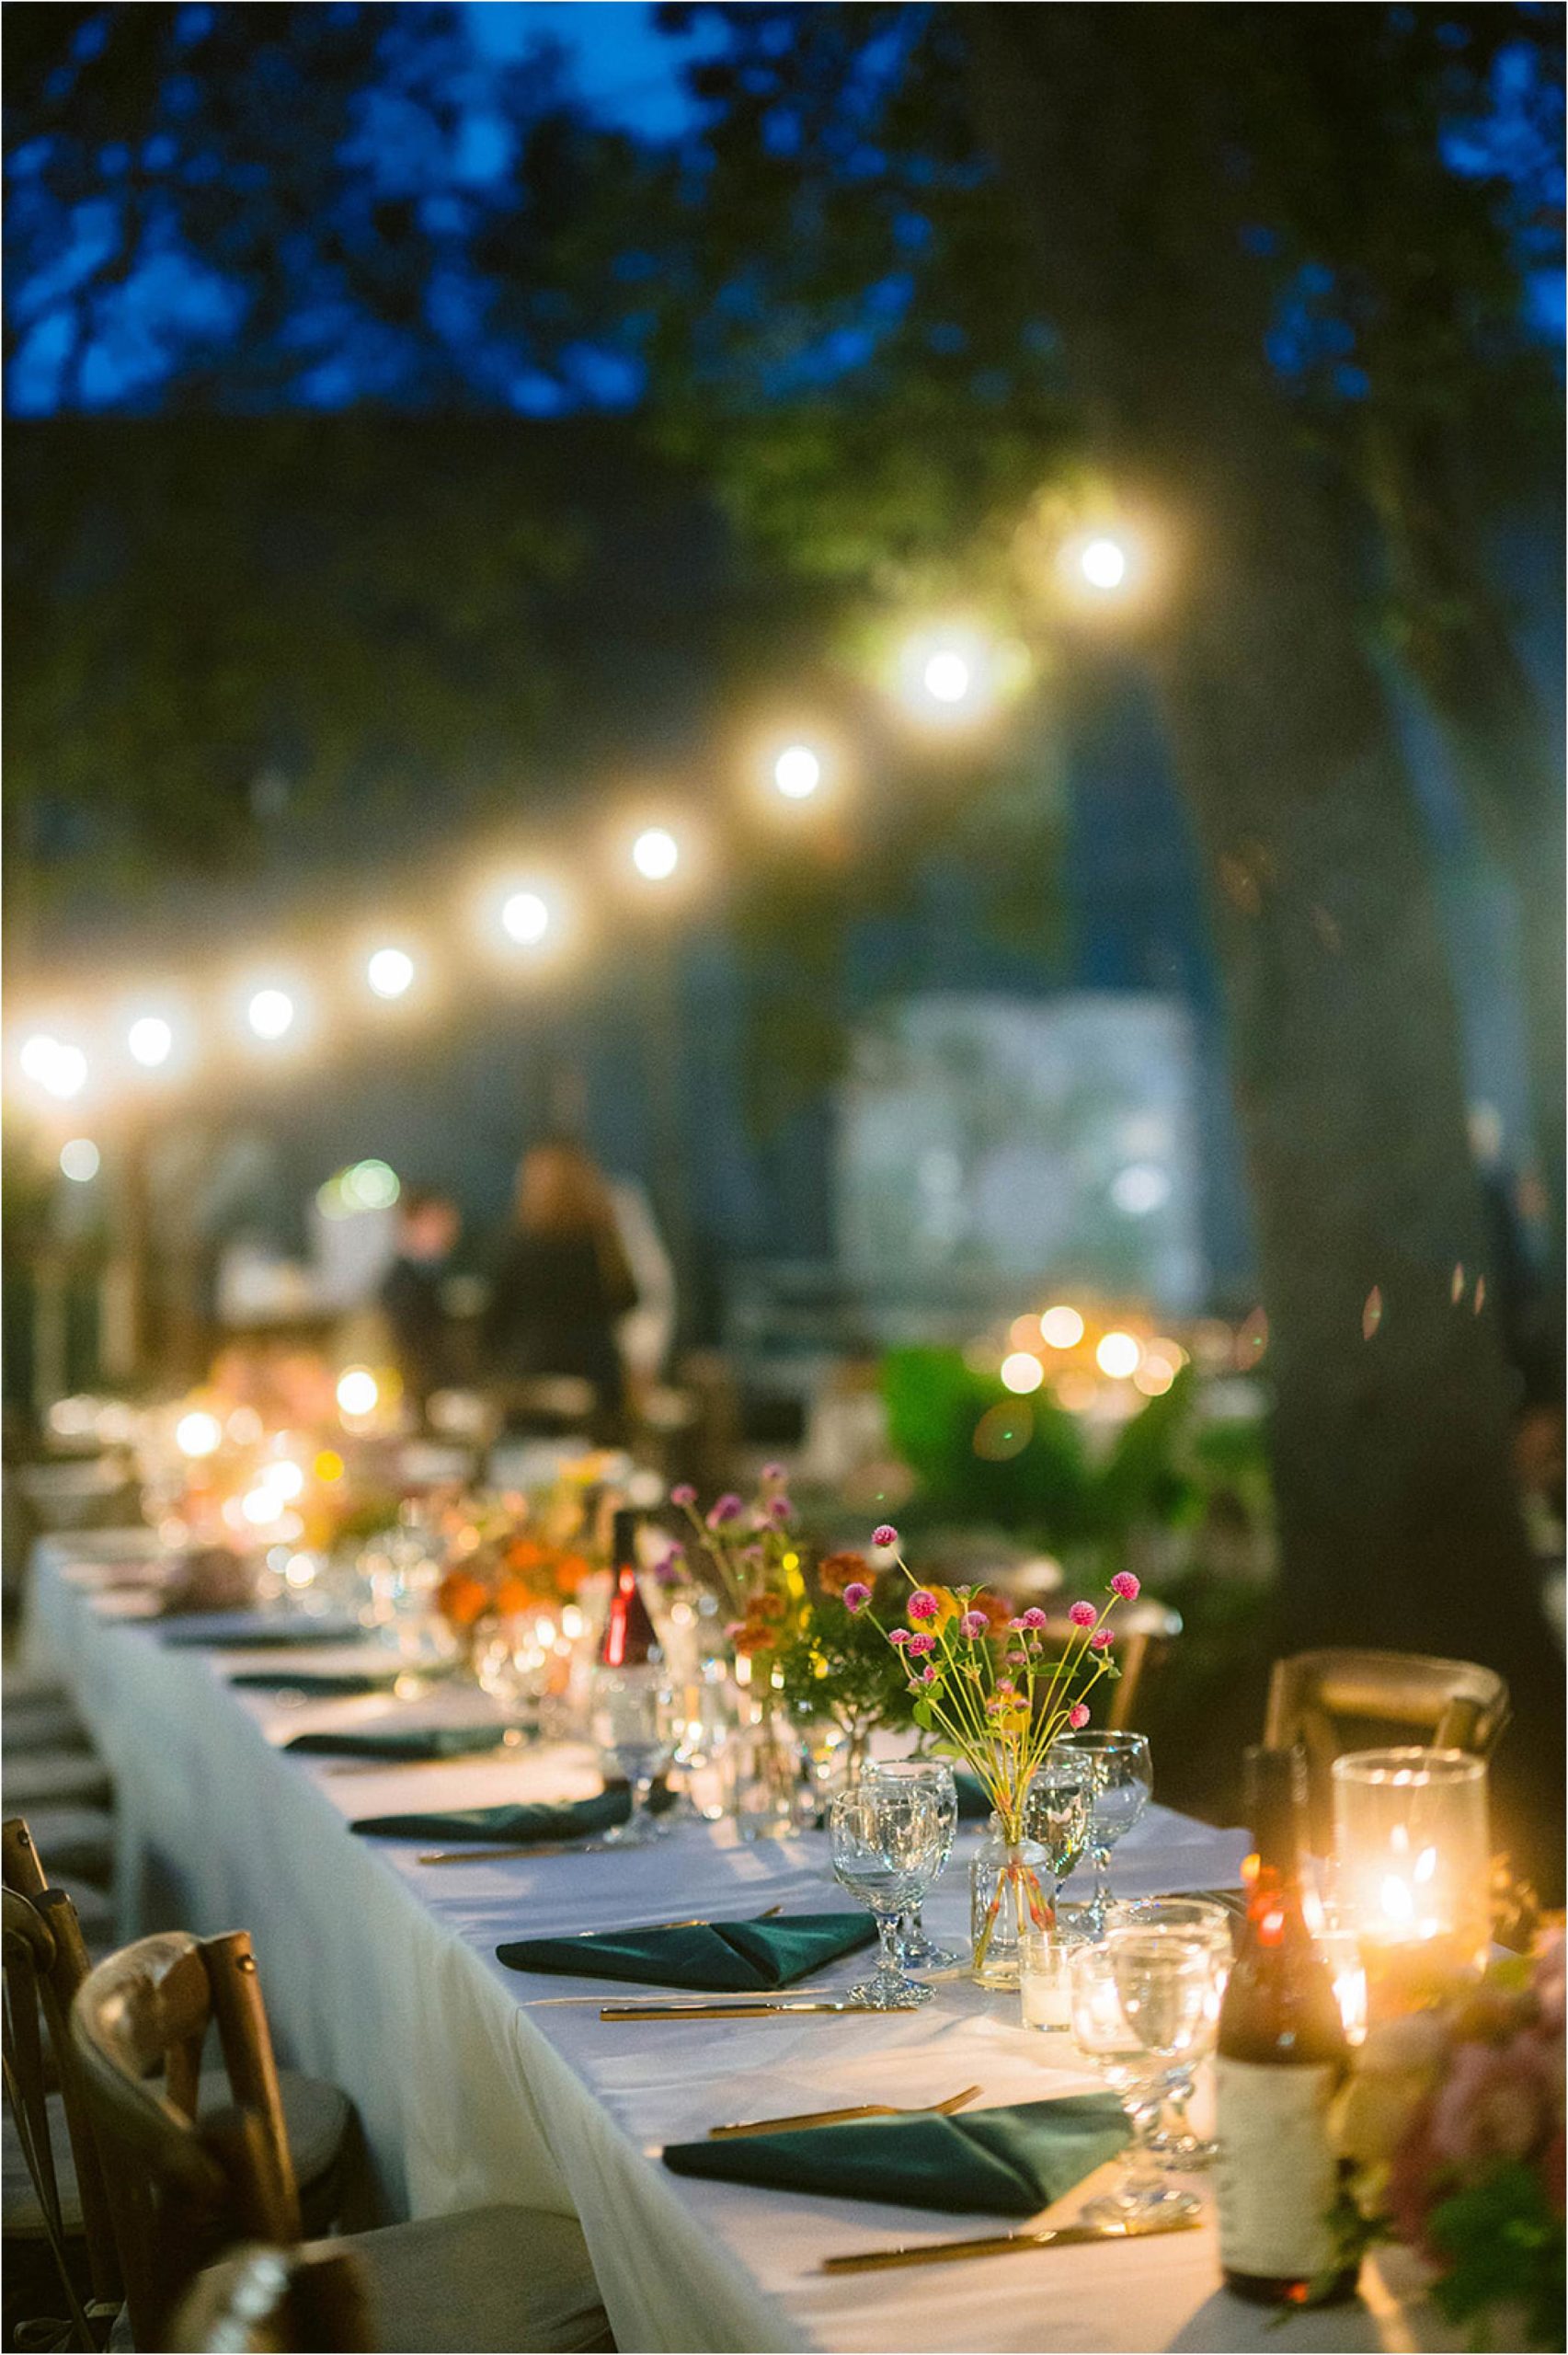 A reception table is set for a candlelit wedding in a courtyard wedding venue.